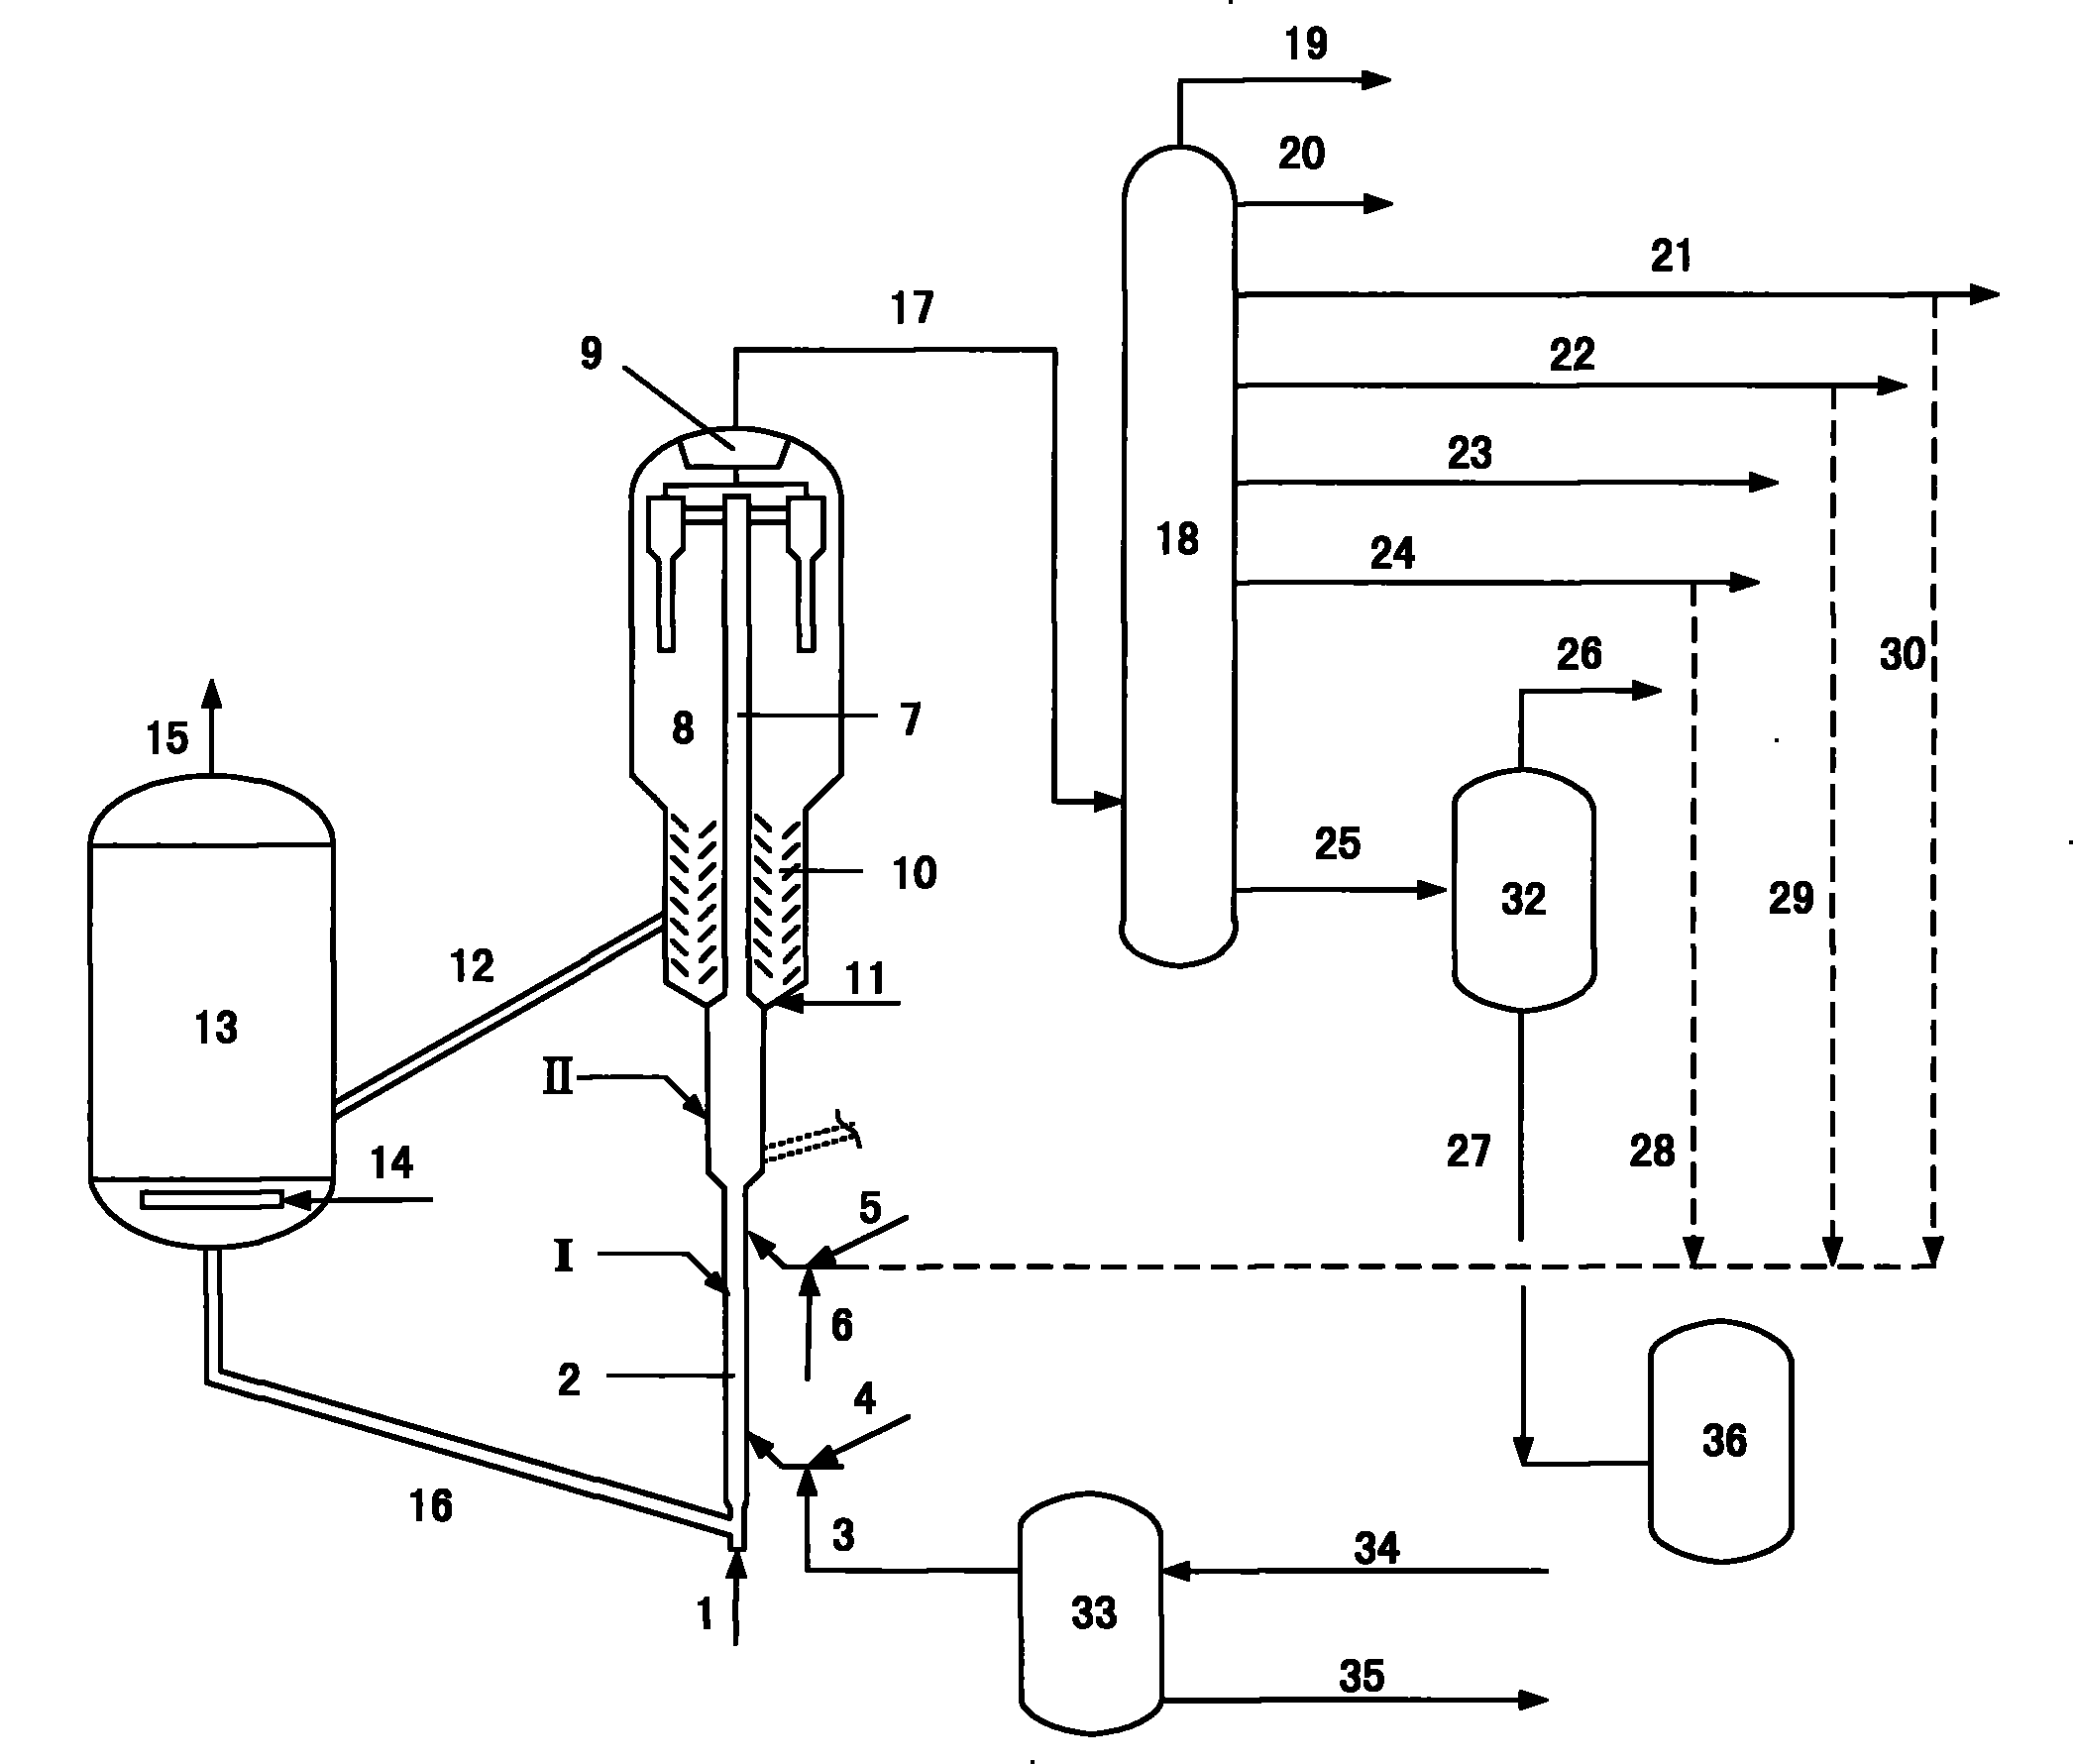 Method for processing inferior crude oil through combined processes